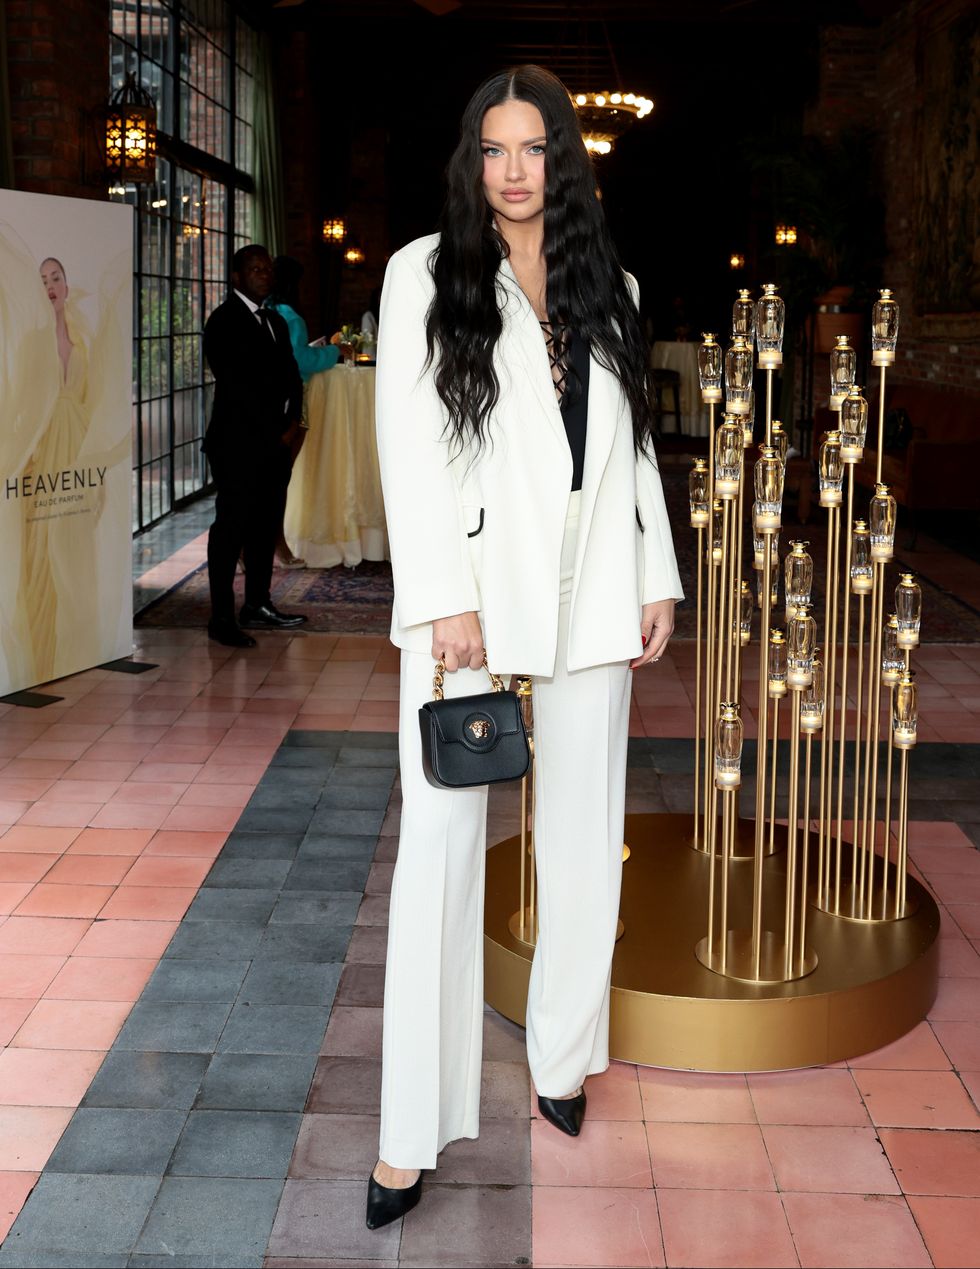 victoria's secret heavenly fragrance event with adriana lima